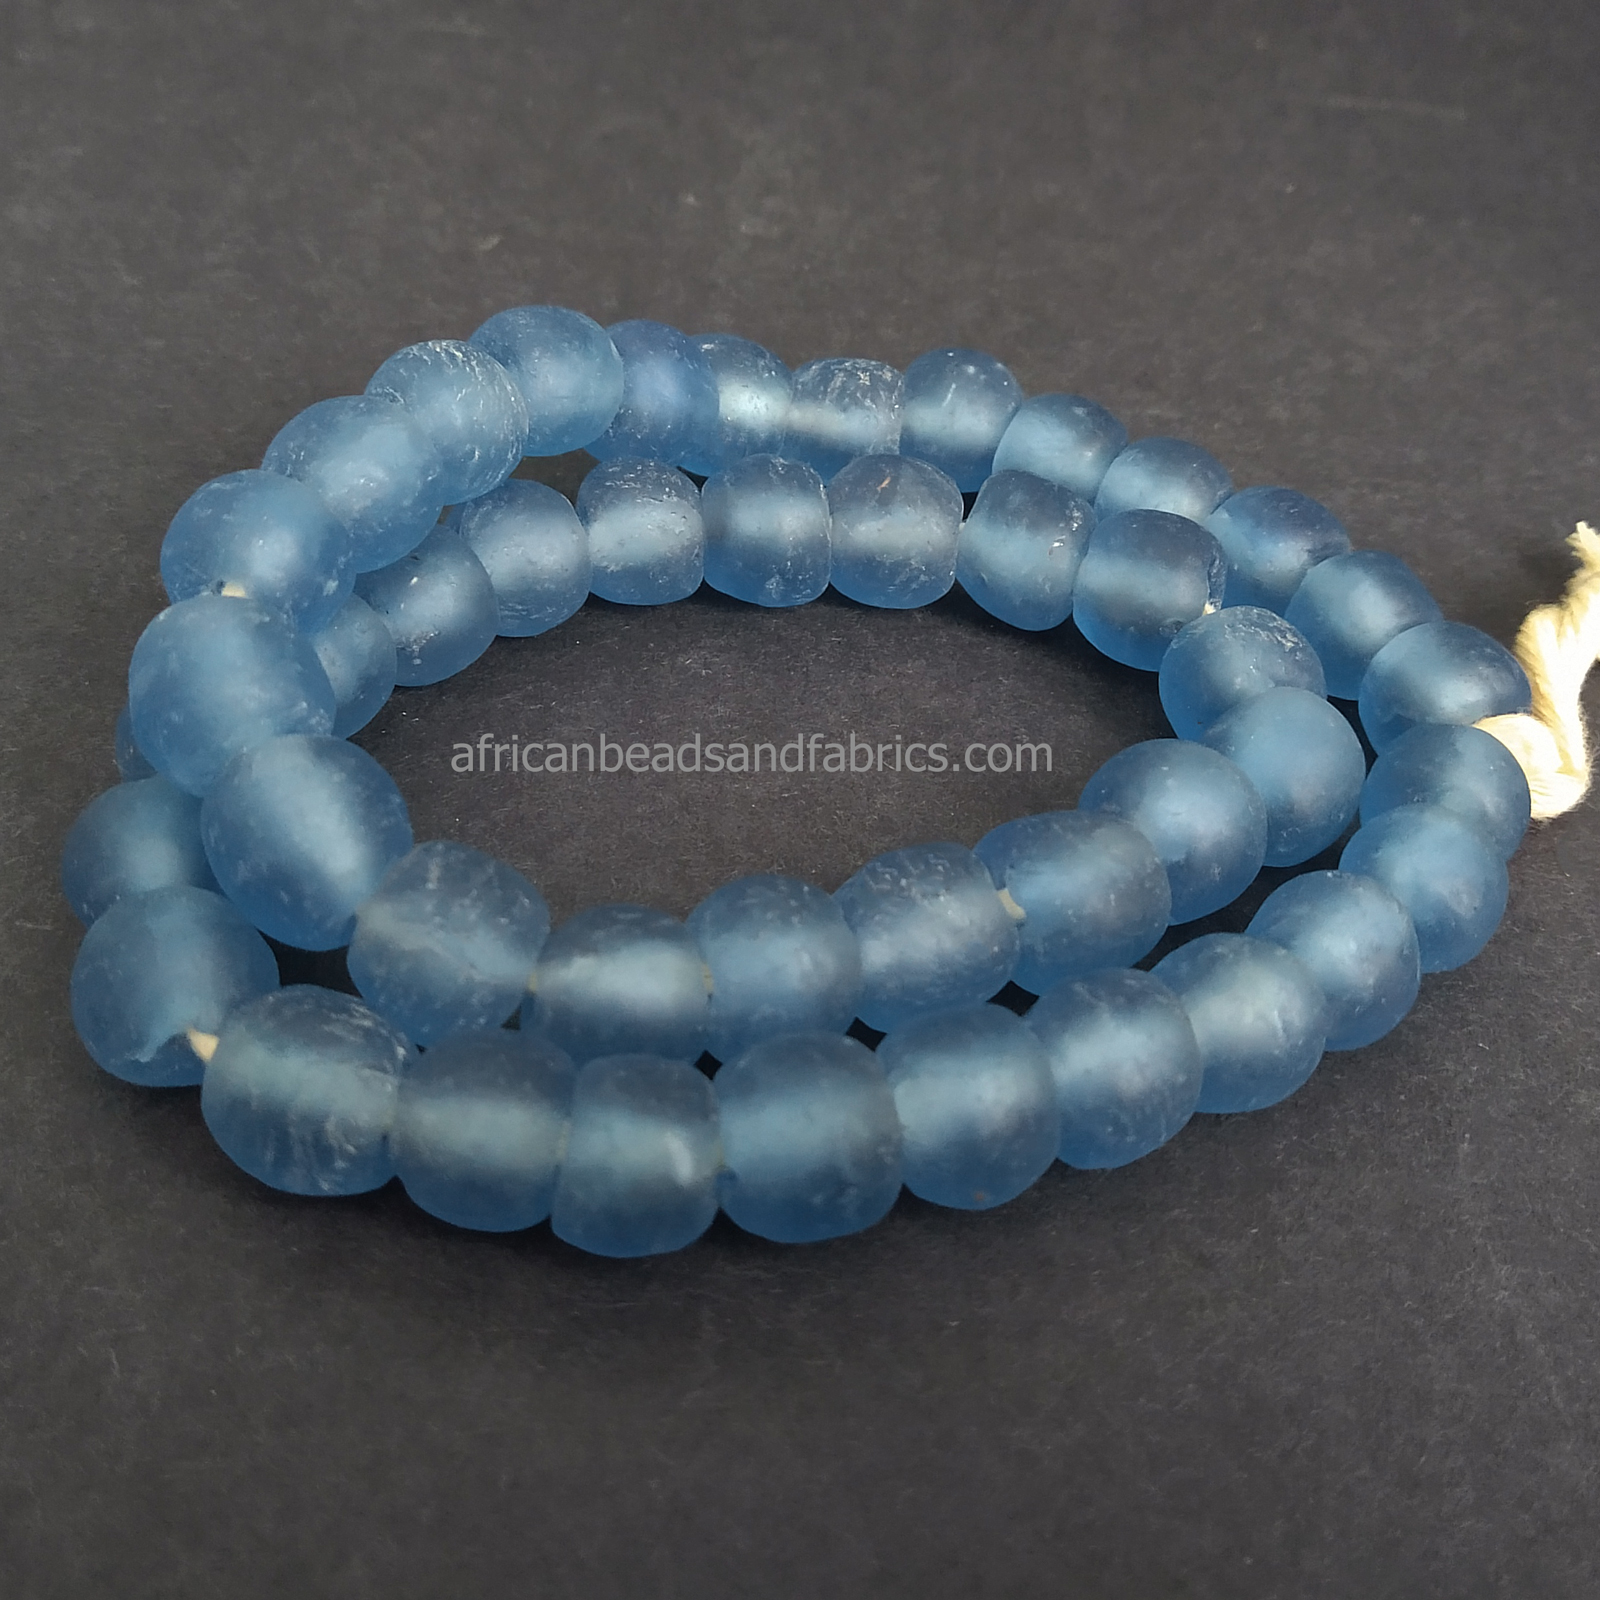 African-Beads-Ghana-Krobo-Recycled-Glass-Pale-Blue-14-to-15mm